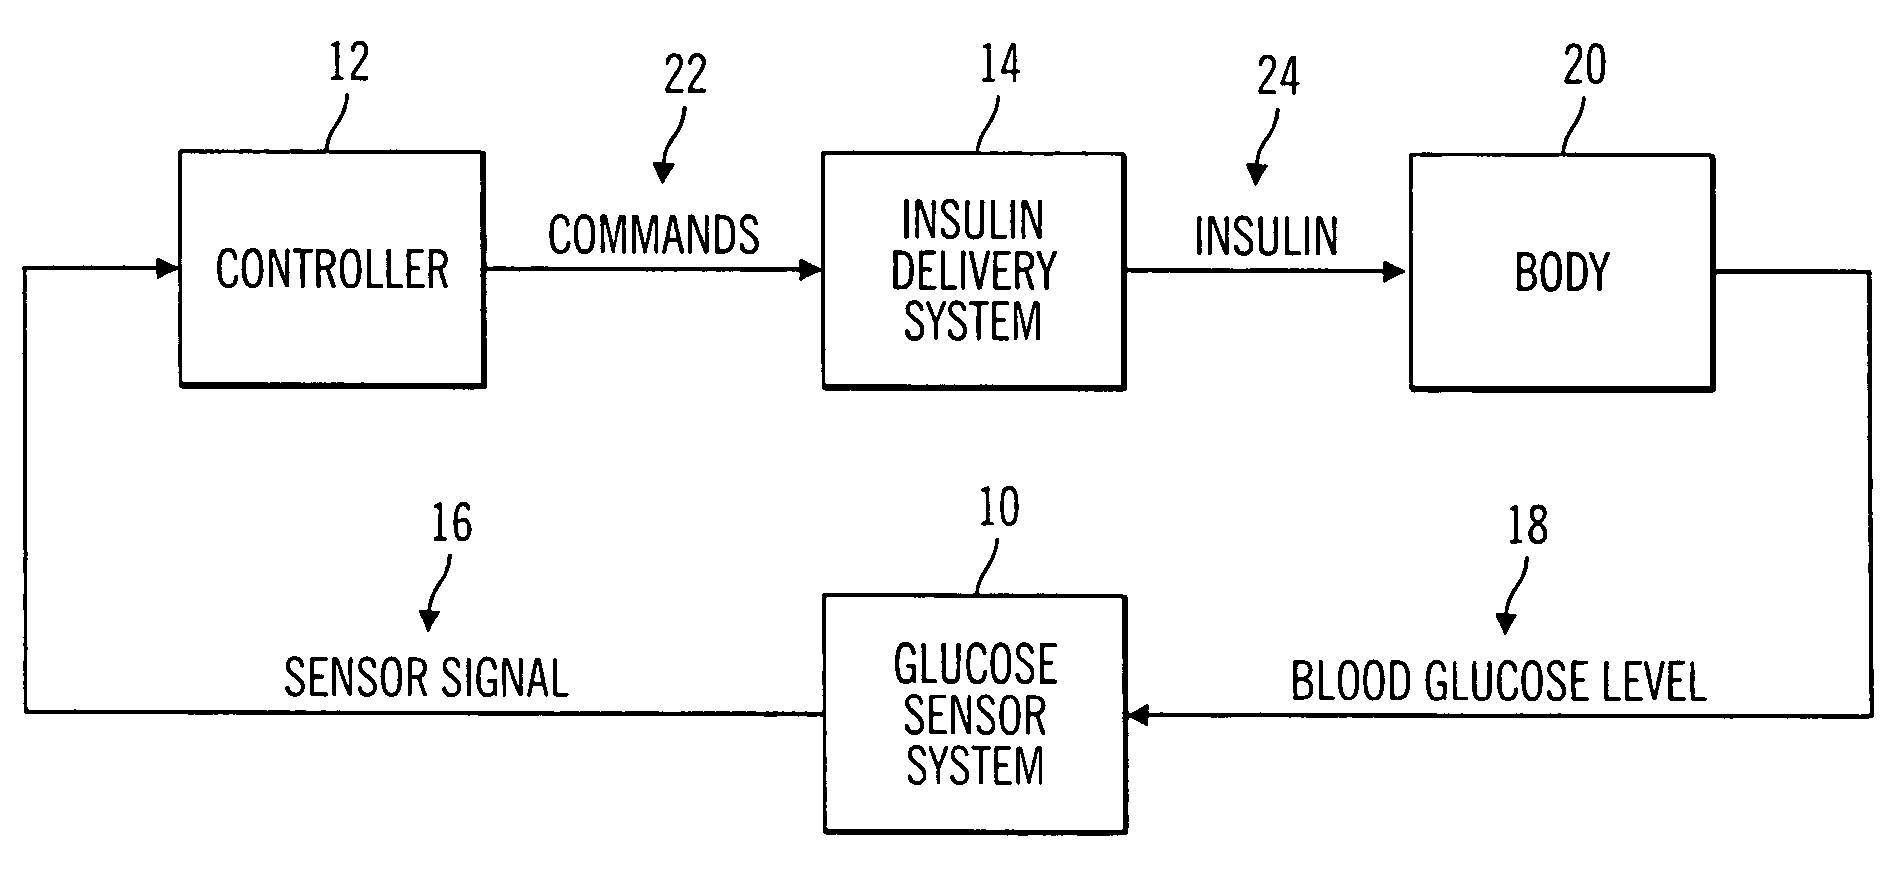 Closed-loop method for controlling insulin infusion